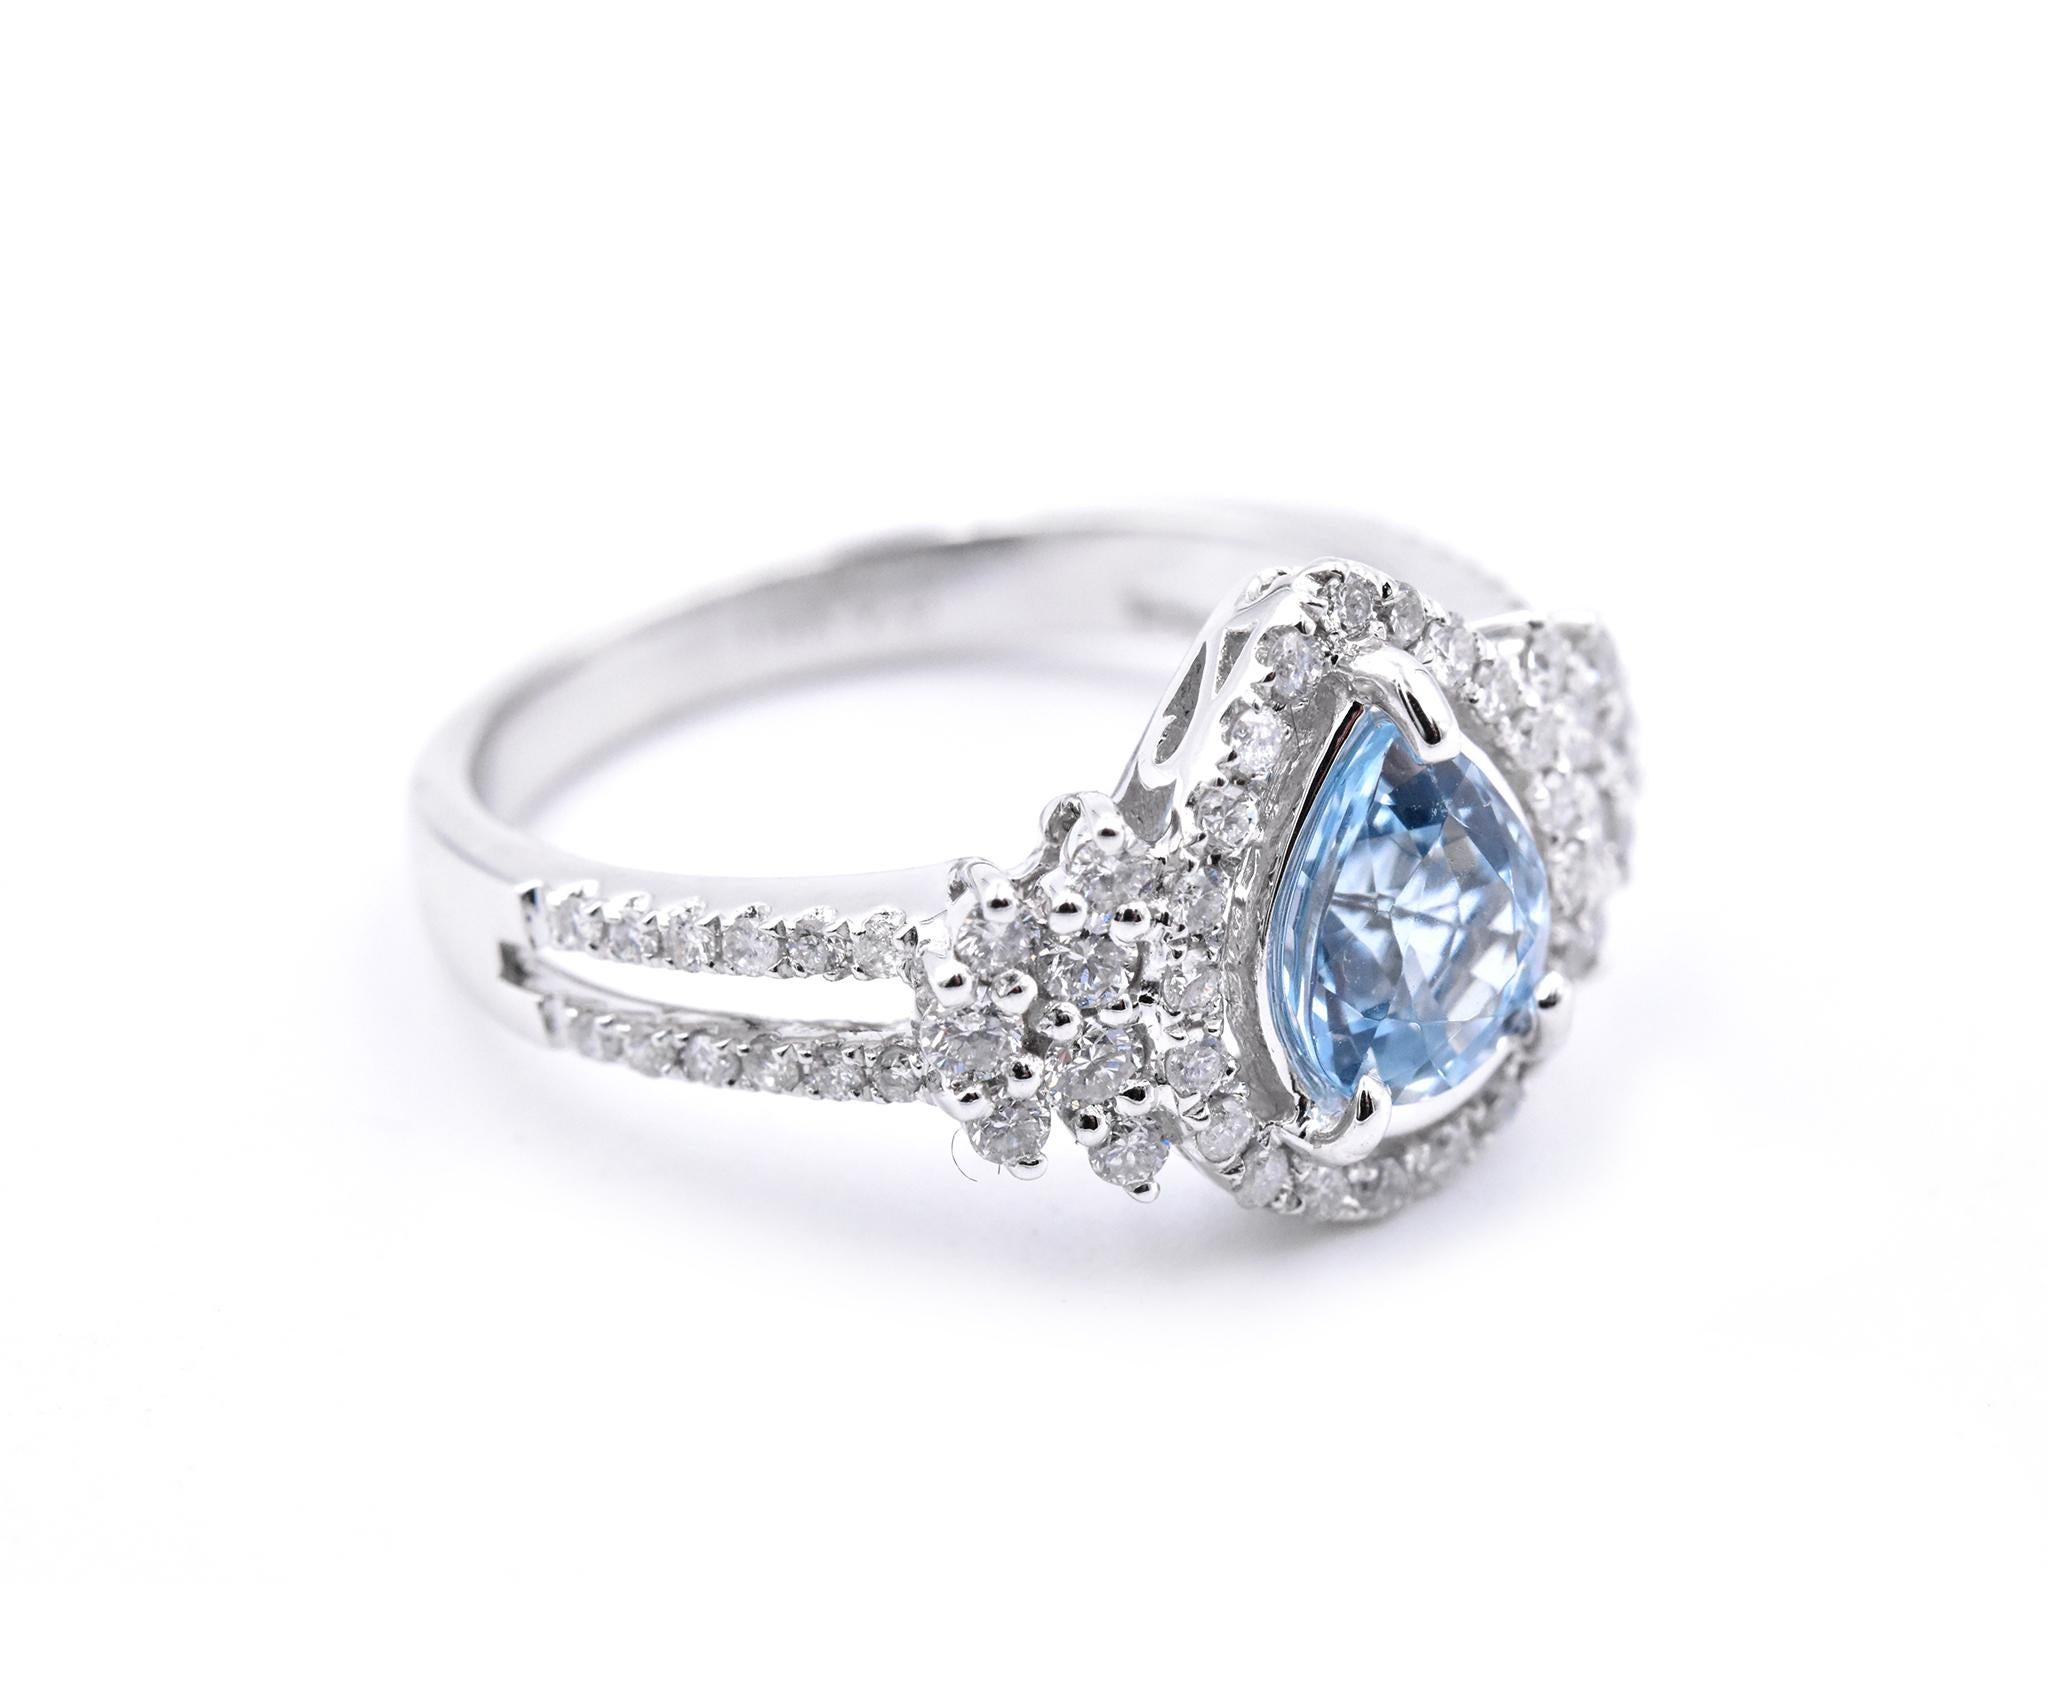 Designer: custom design
Material: 14k white gold
Gemstones: Pear Cut Aquamarine = .84ct
Certification: AGI 25342
Diamonds:   58 round brilliant cuts = .58cttw
Color: F
Clarity: VS2-SI
Ring Size: 7.5 (please allow two additional shipping days for